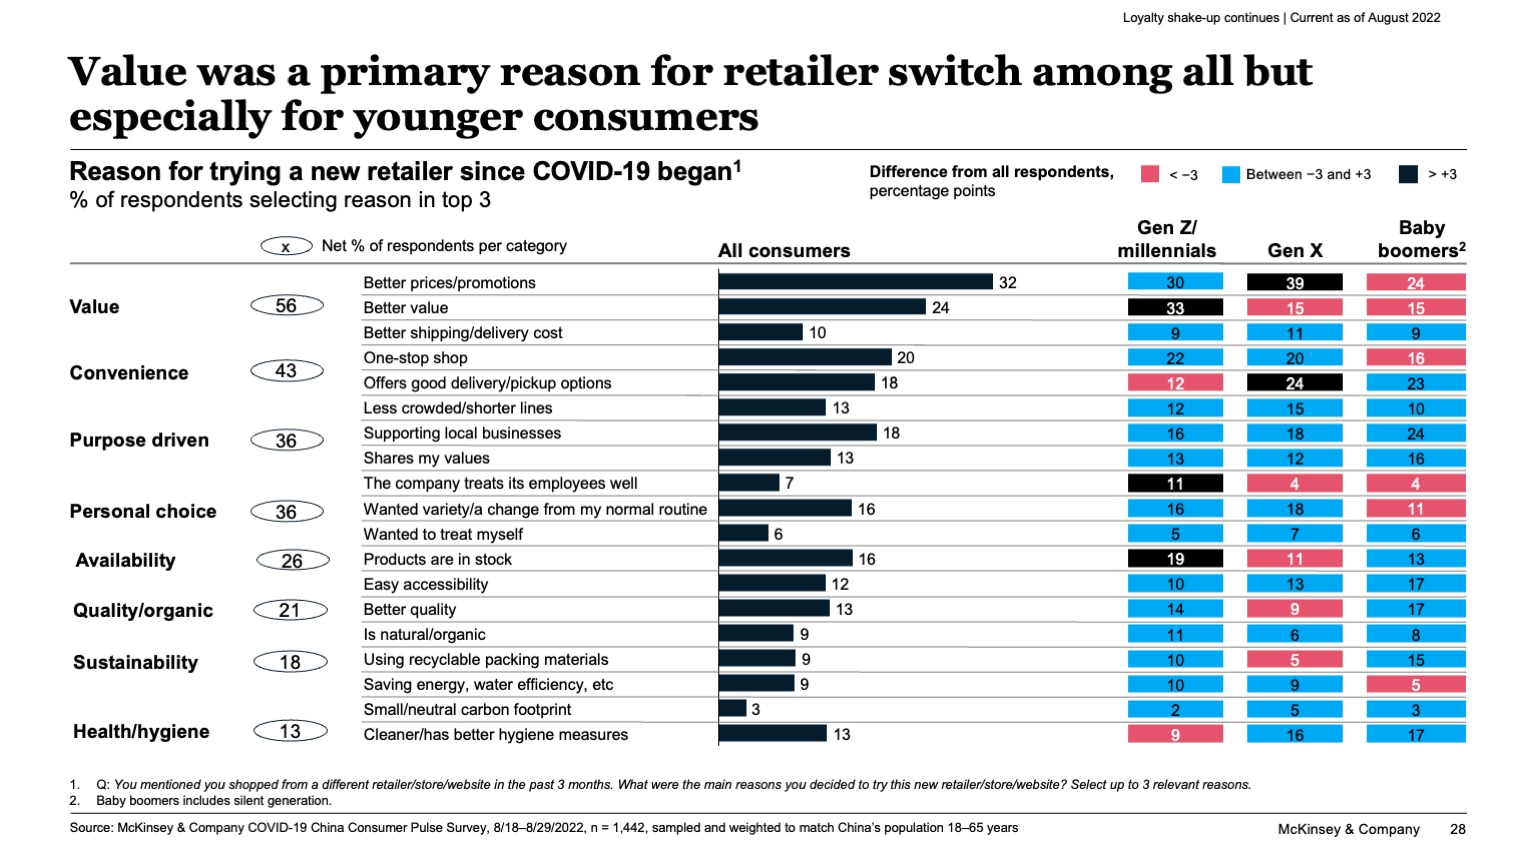 Value was a primary reason for retailer switch among all but especially for younger consumers